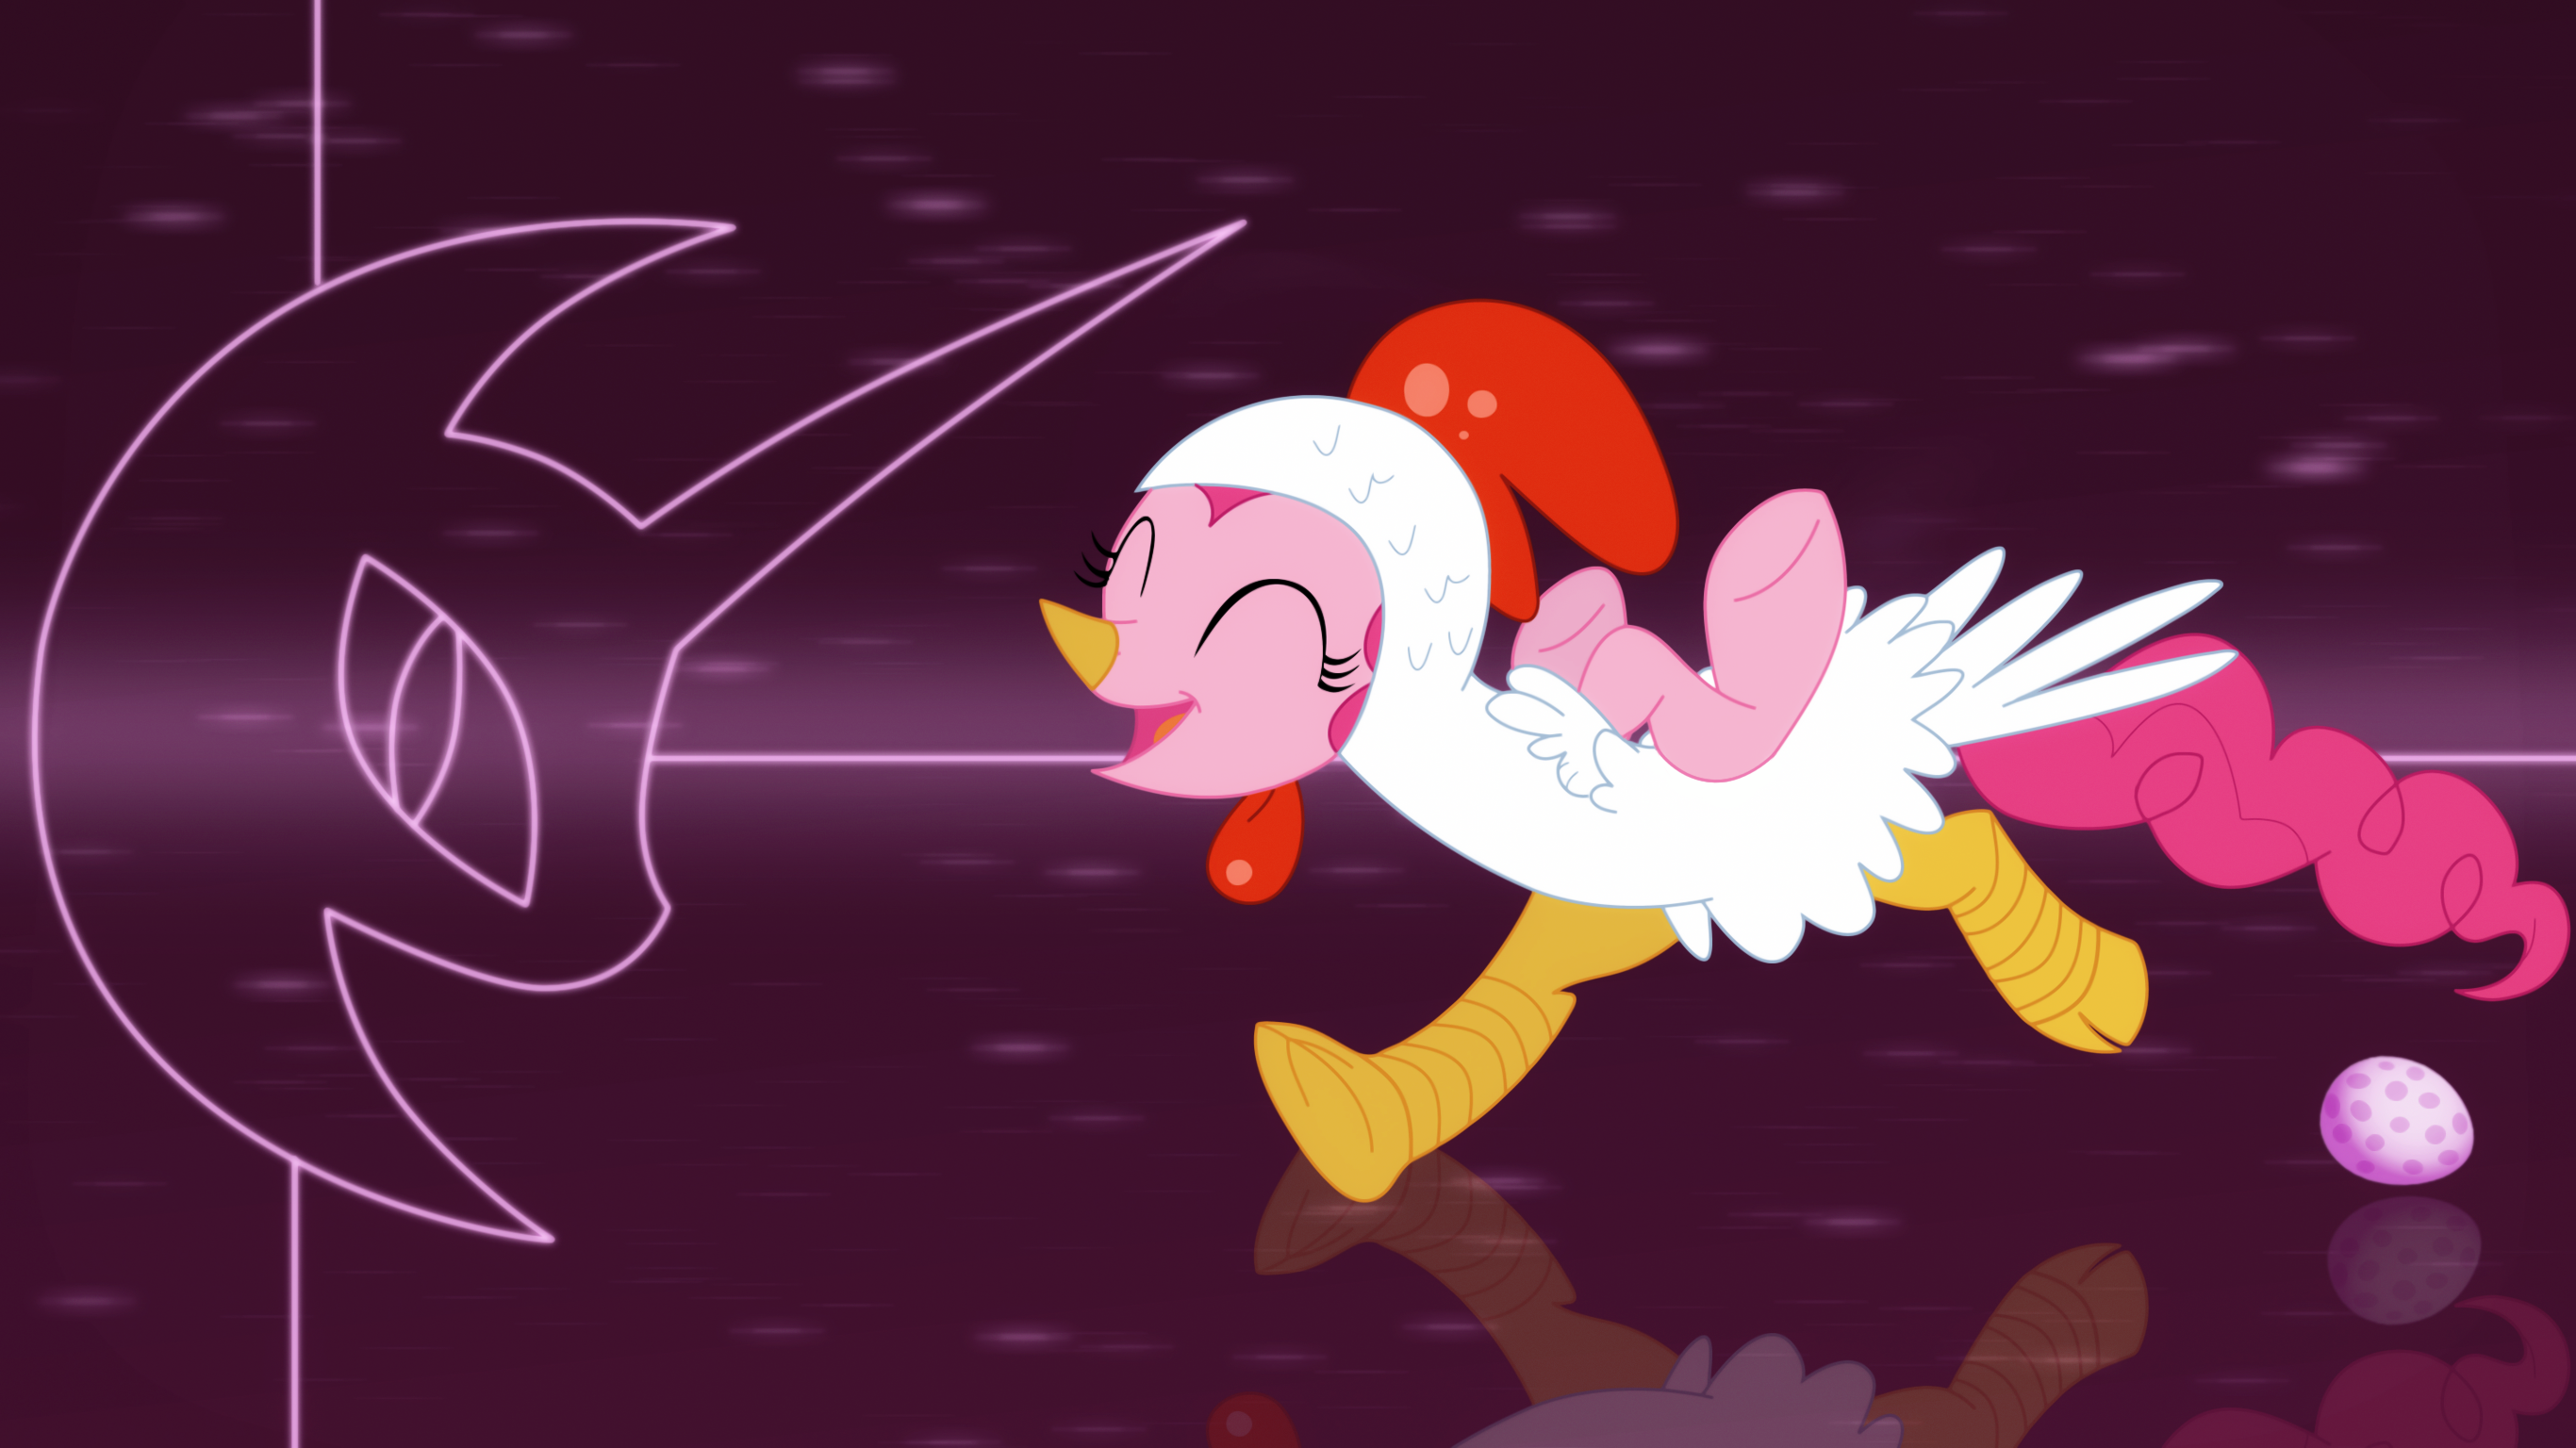 Chicken Pie wallpaper by Elsdrake and The-Smiling-Pony